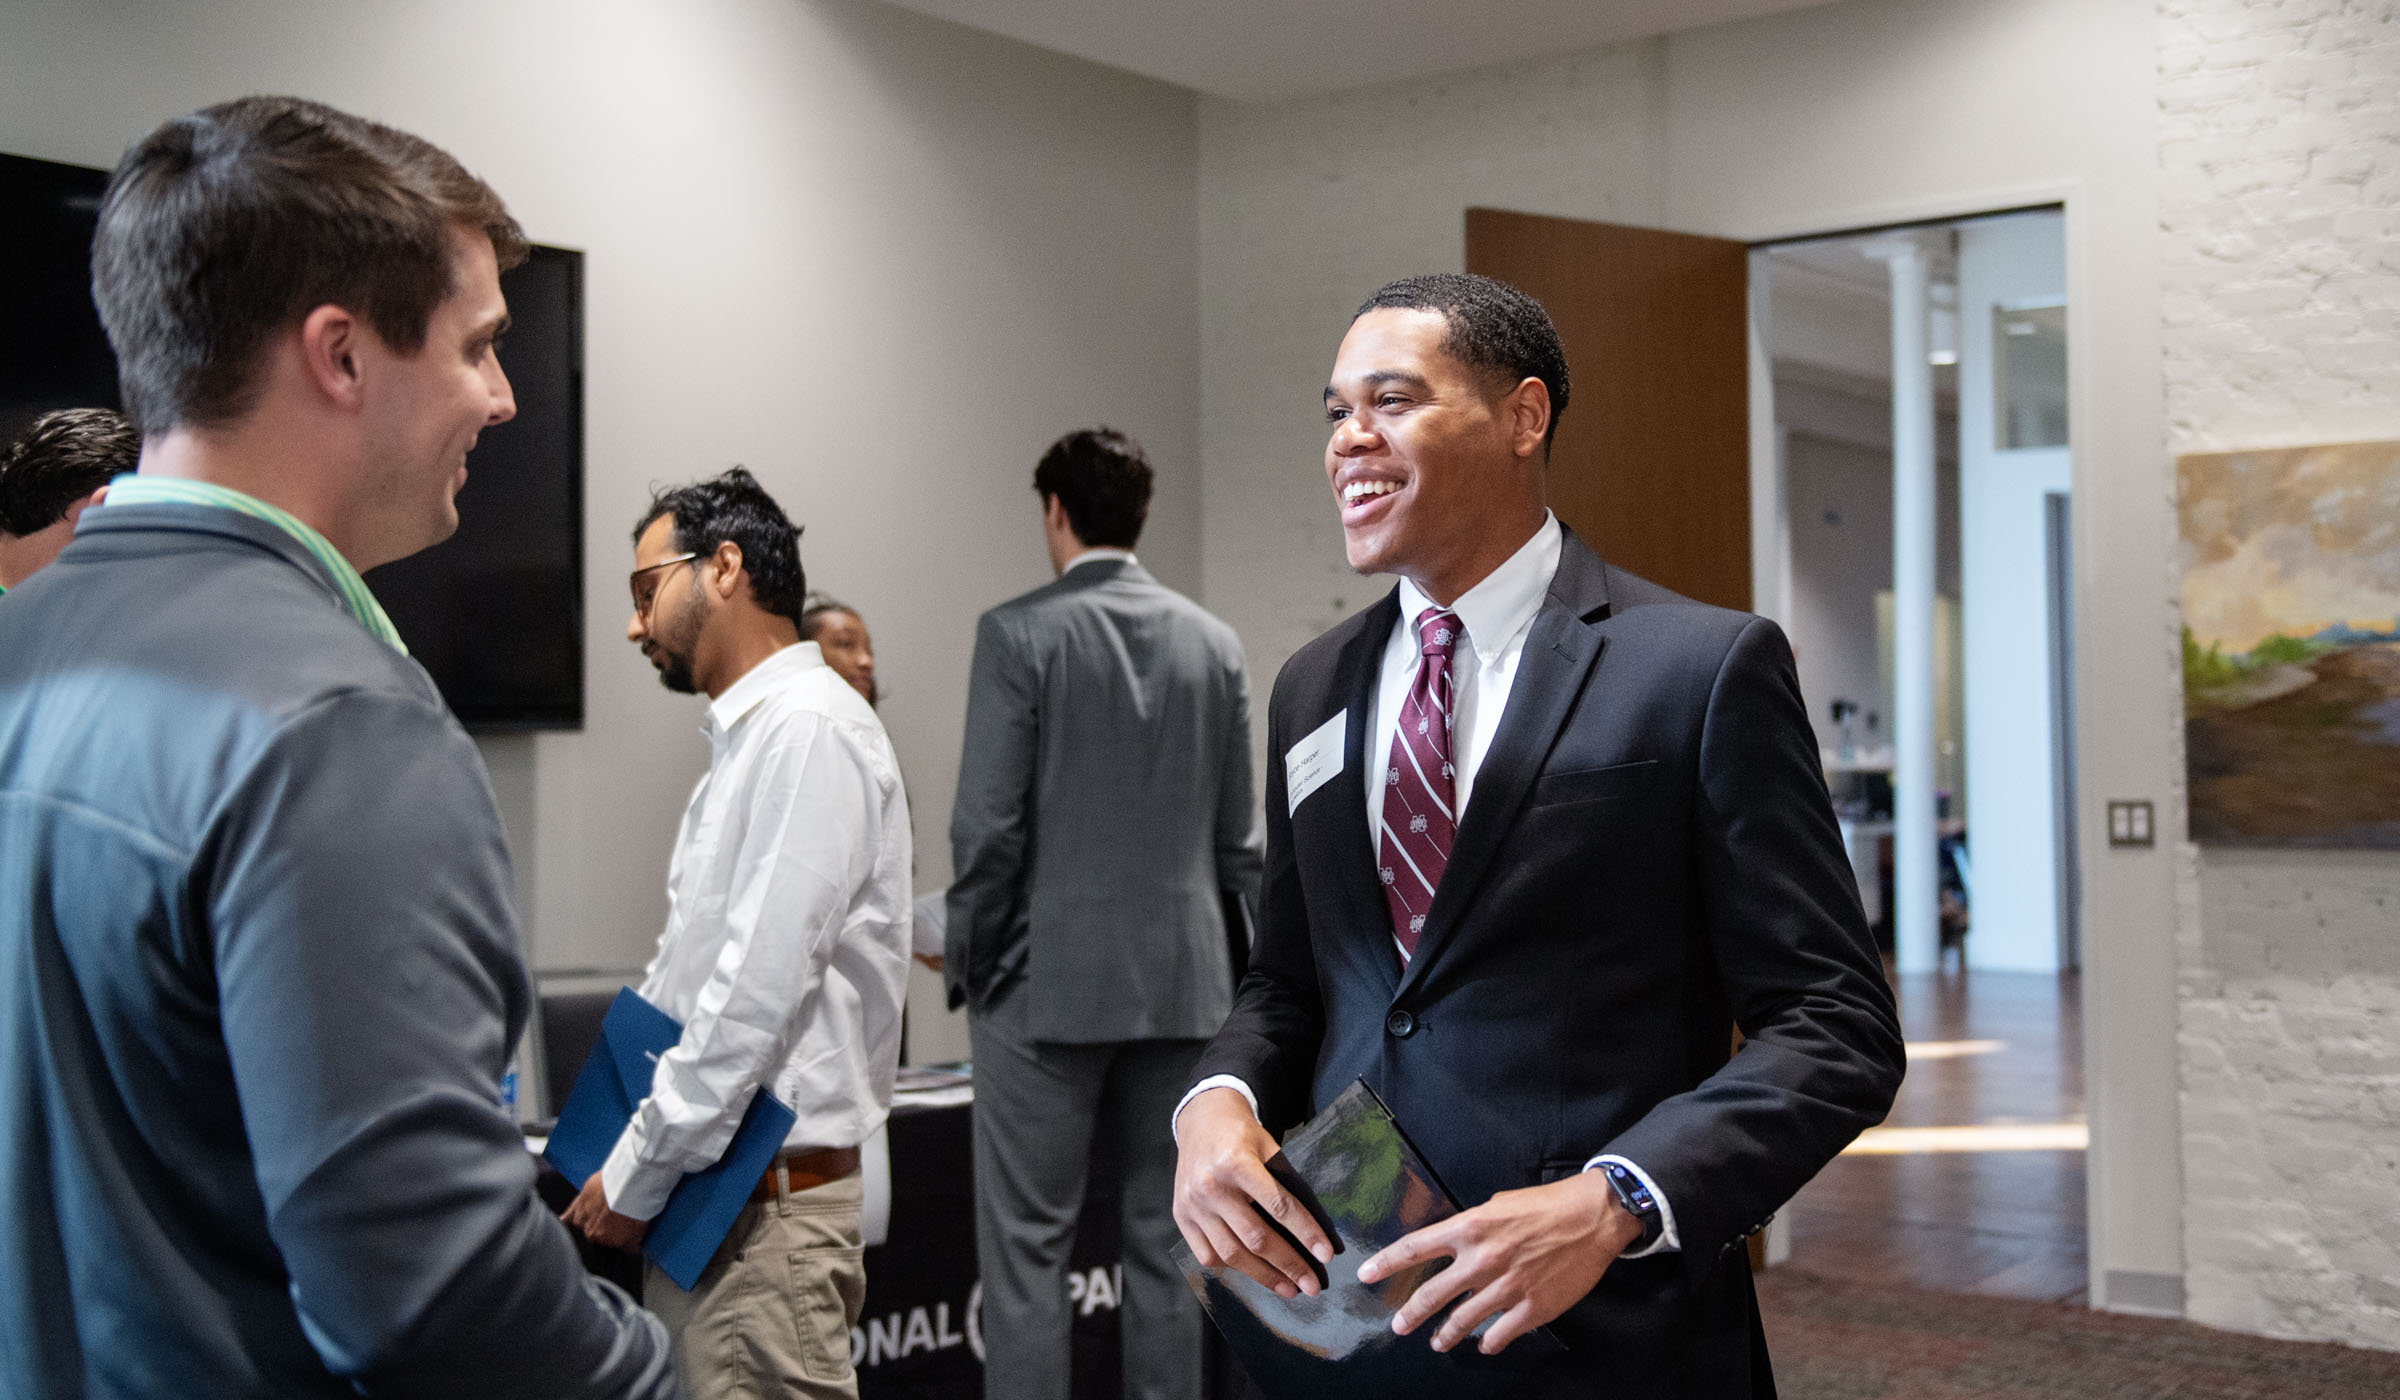 A student in a suit holding a portfolio folder at center smiles while talking to a prospective employer.